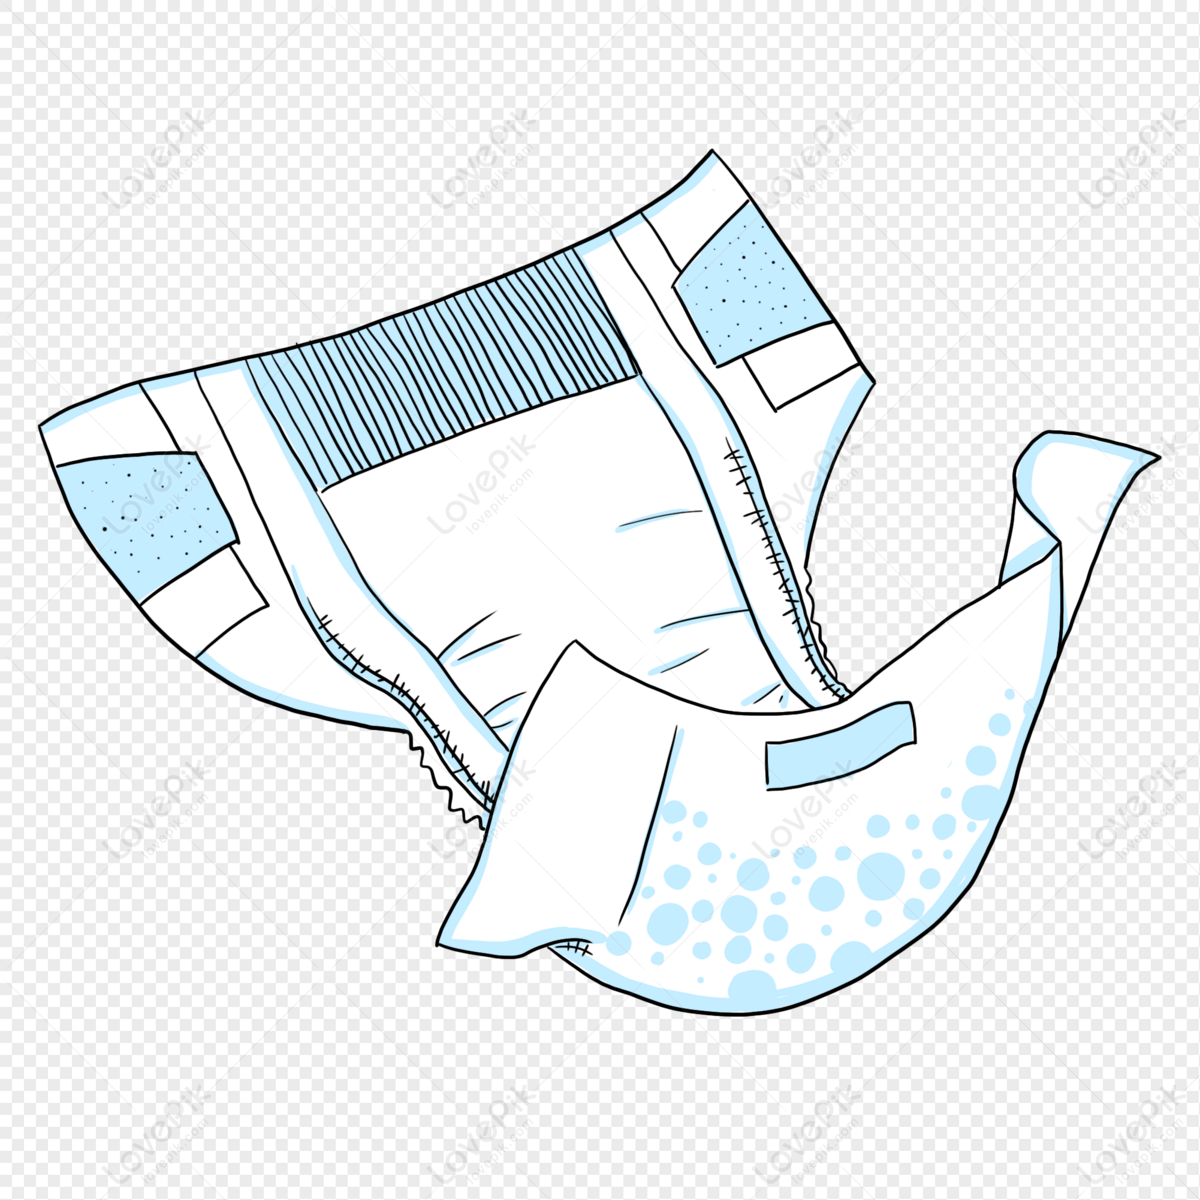 Baby supplies diapers, baby products, baby, supplies png image free download